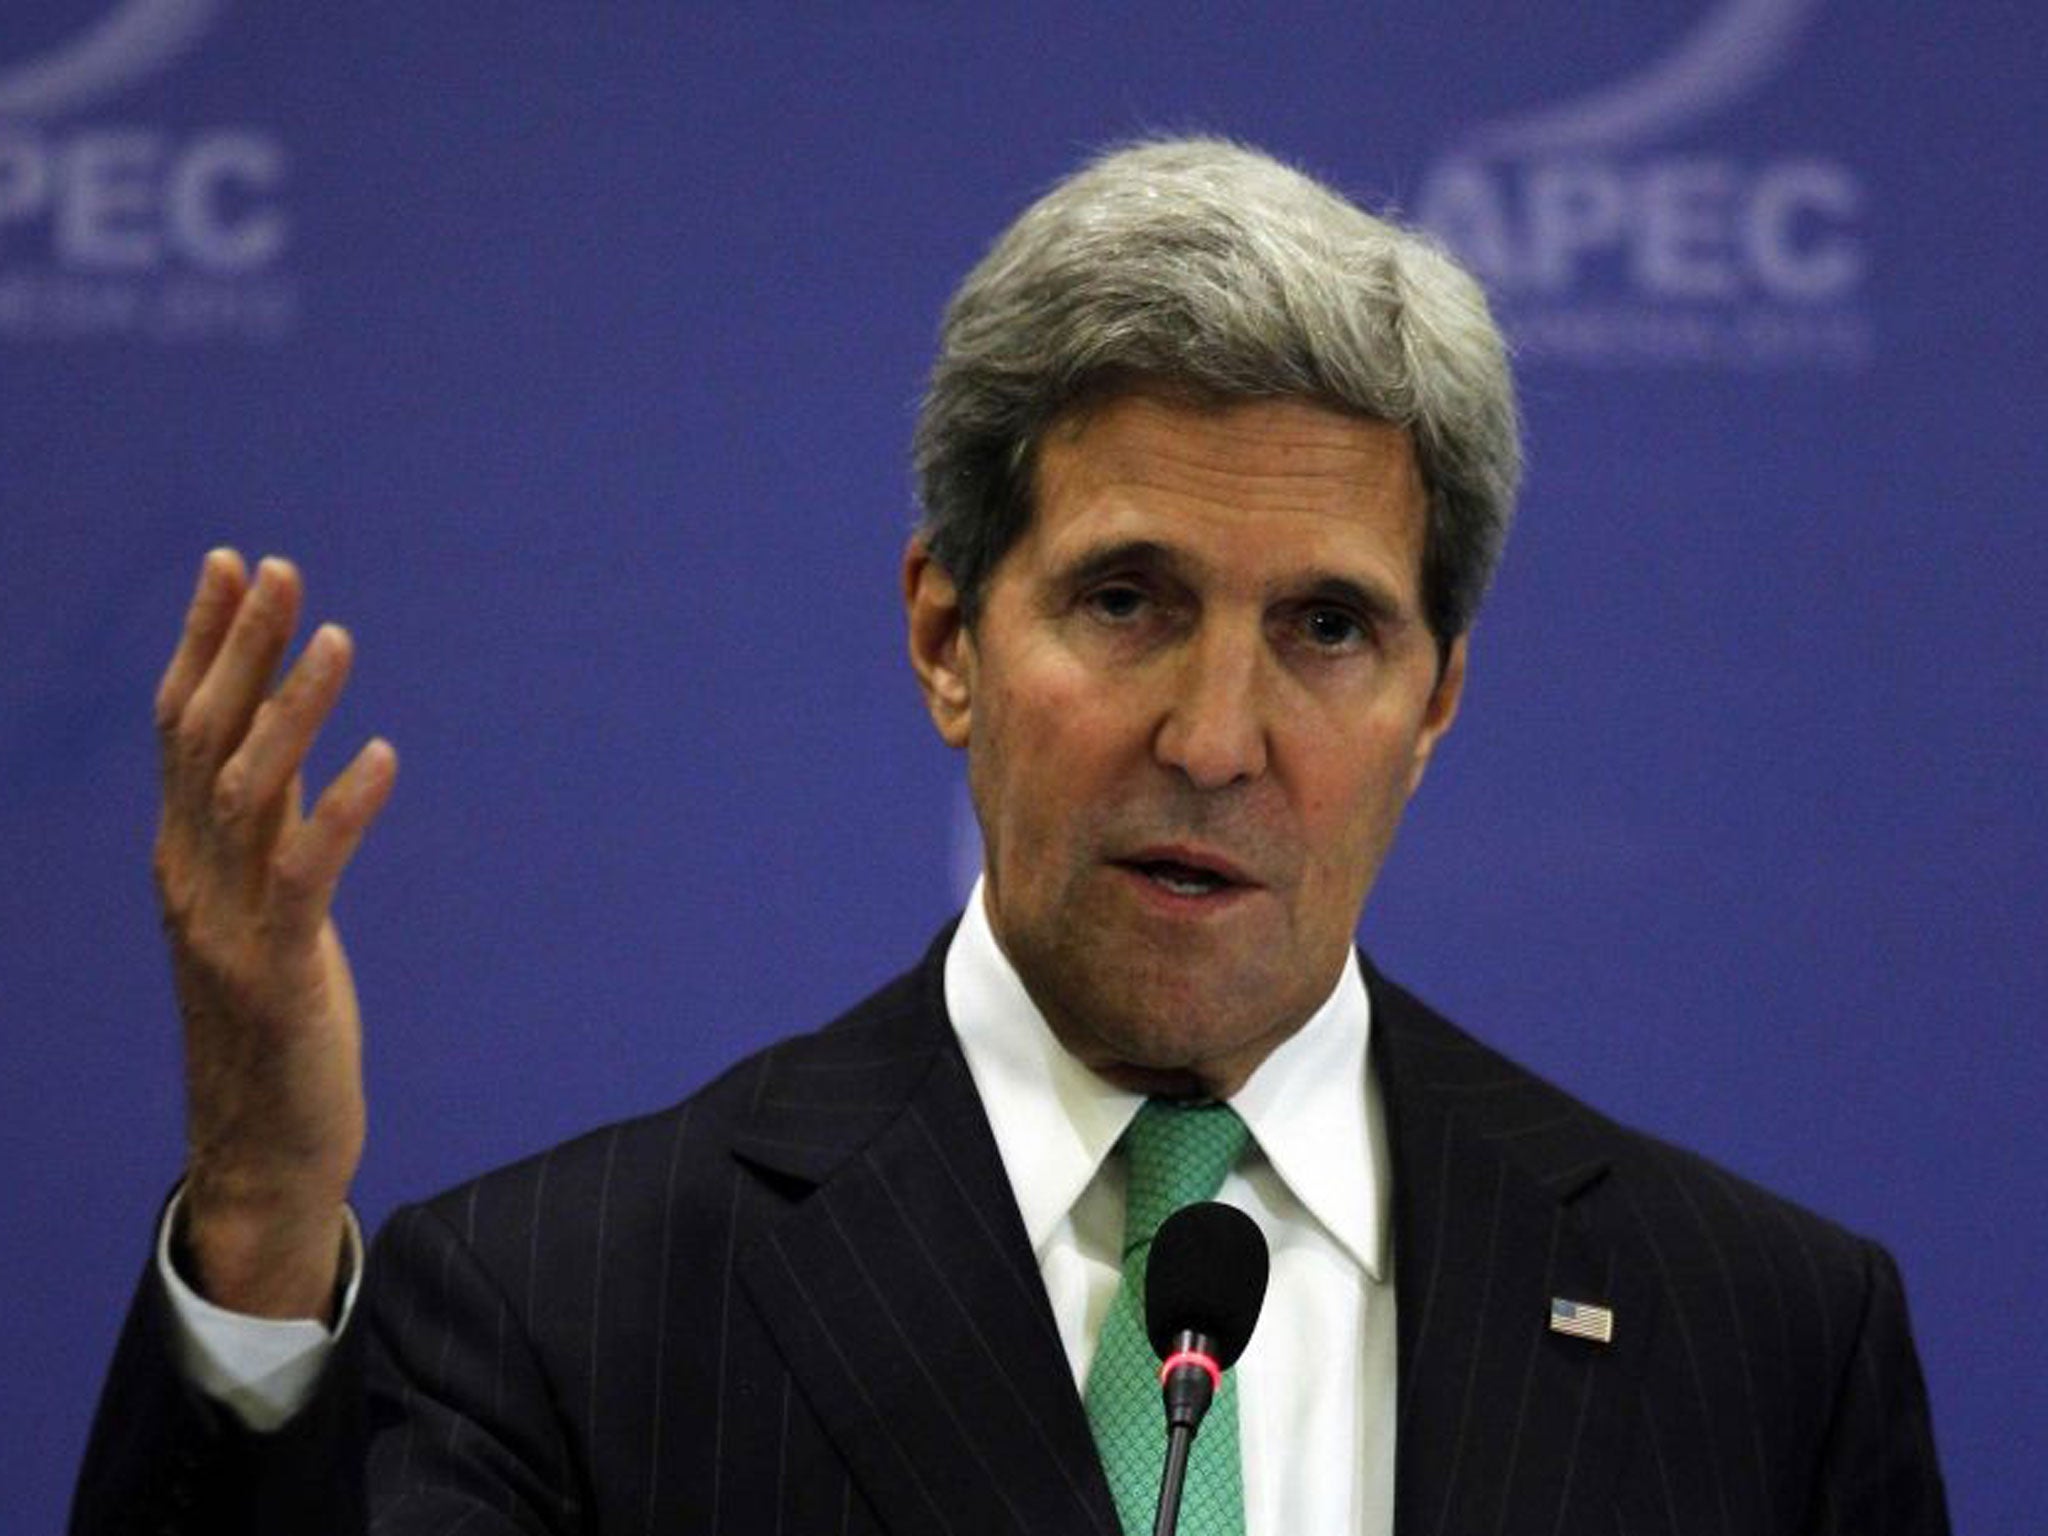 Kerry: Condemned ‘political silliness’